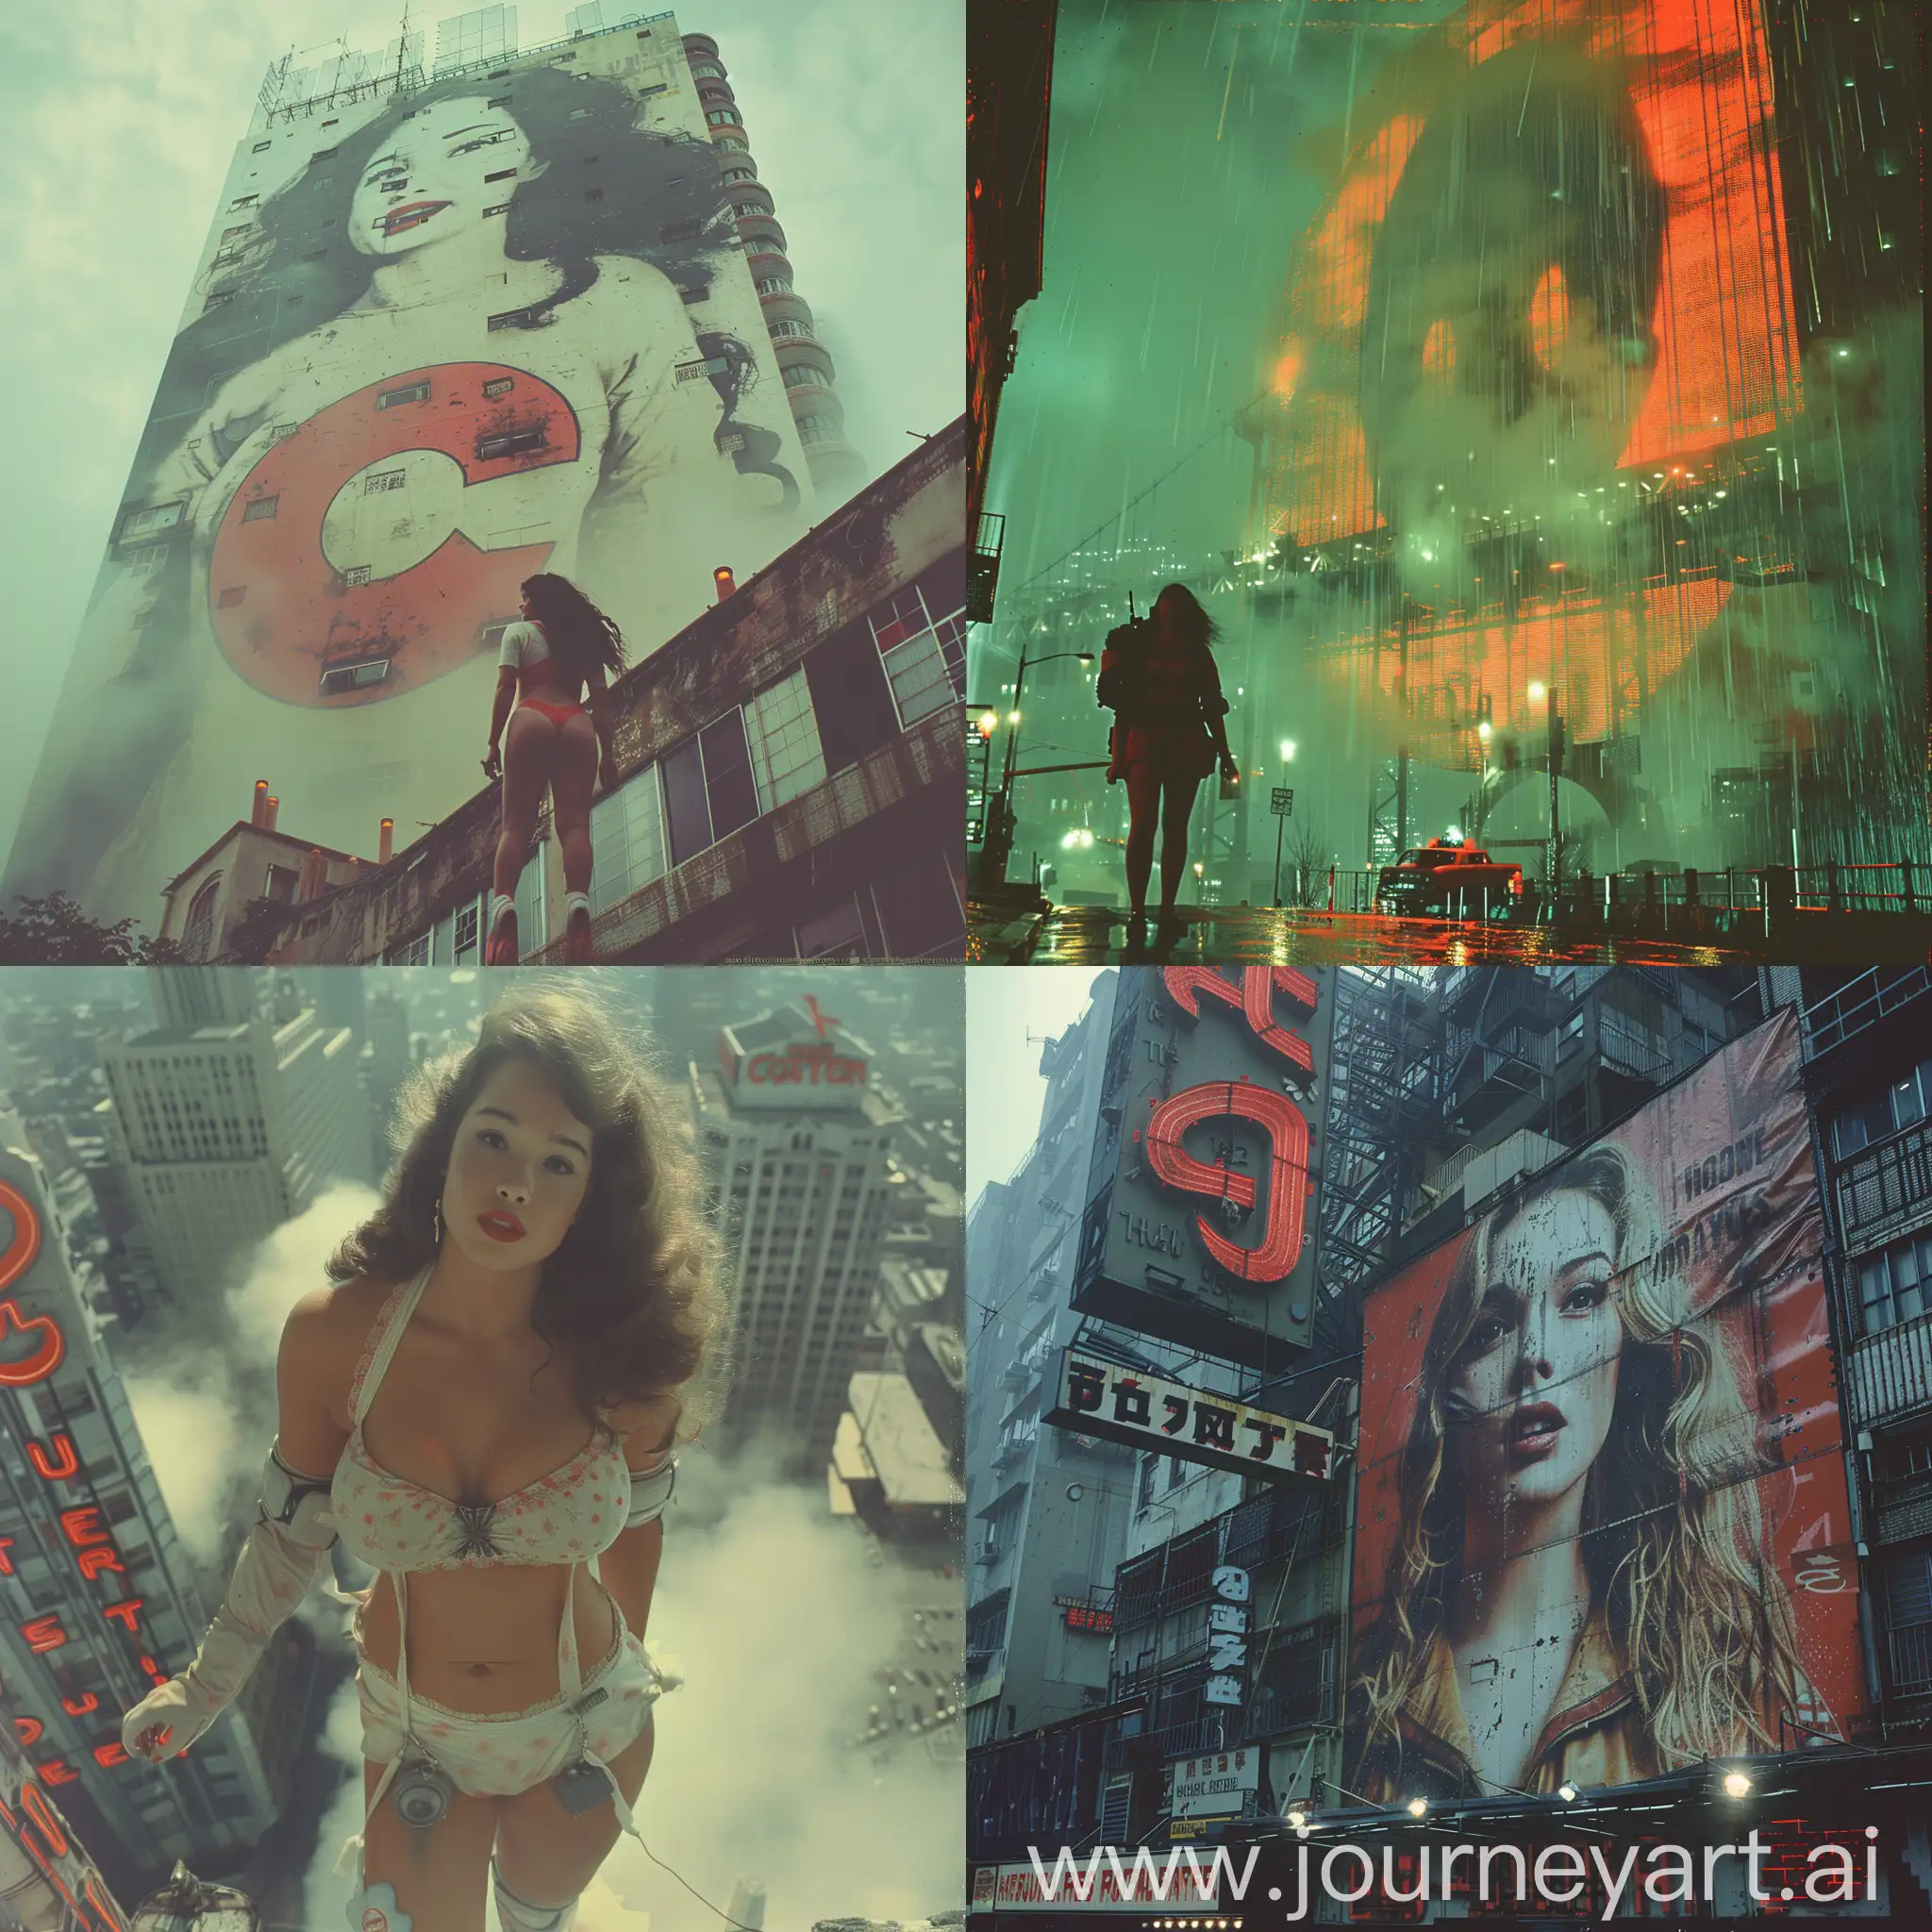 Cinematic-Ghostbusters-Tribute-Giant-Woman-Haunting-Cityscape-with-Iconic-Cyan-and-Red-Palette